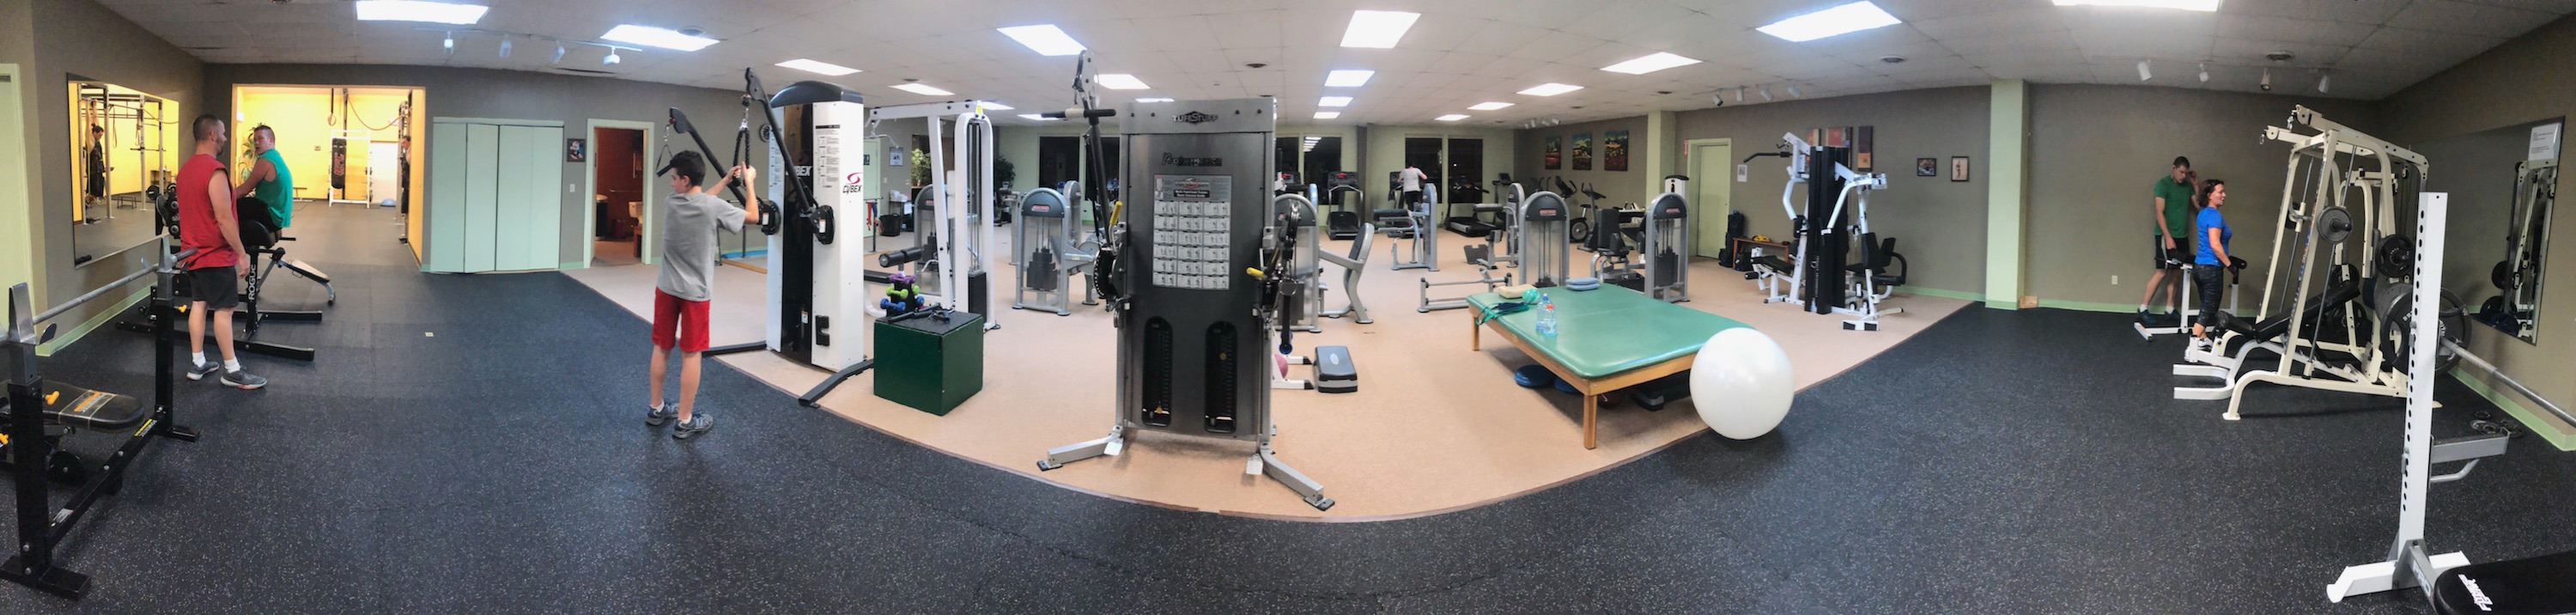 Lakeside Physical Therapy & Fitness Center 685 White Mountain Hwy, Chocorua New Hampshire 03817